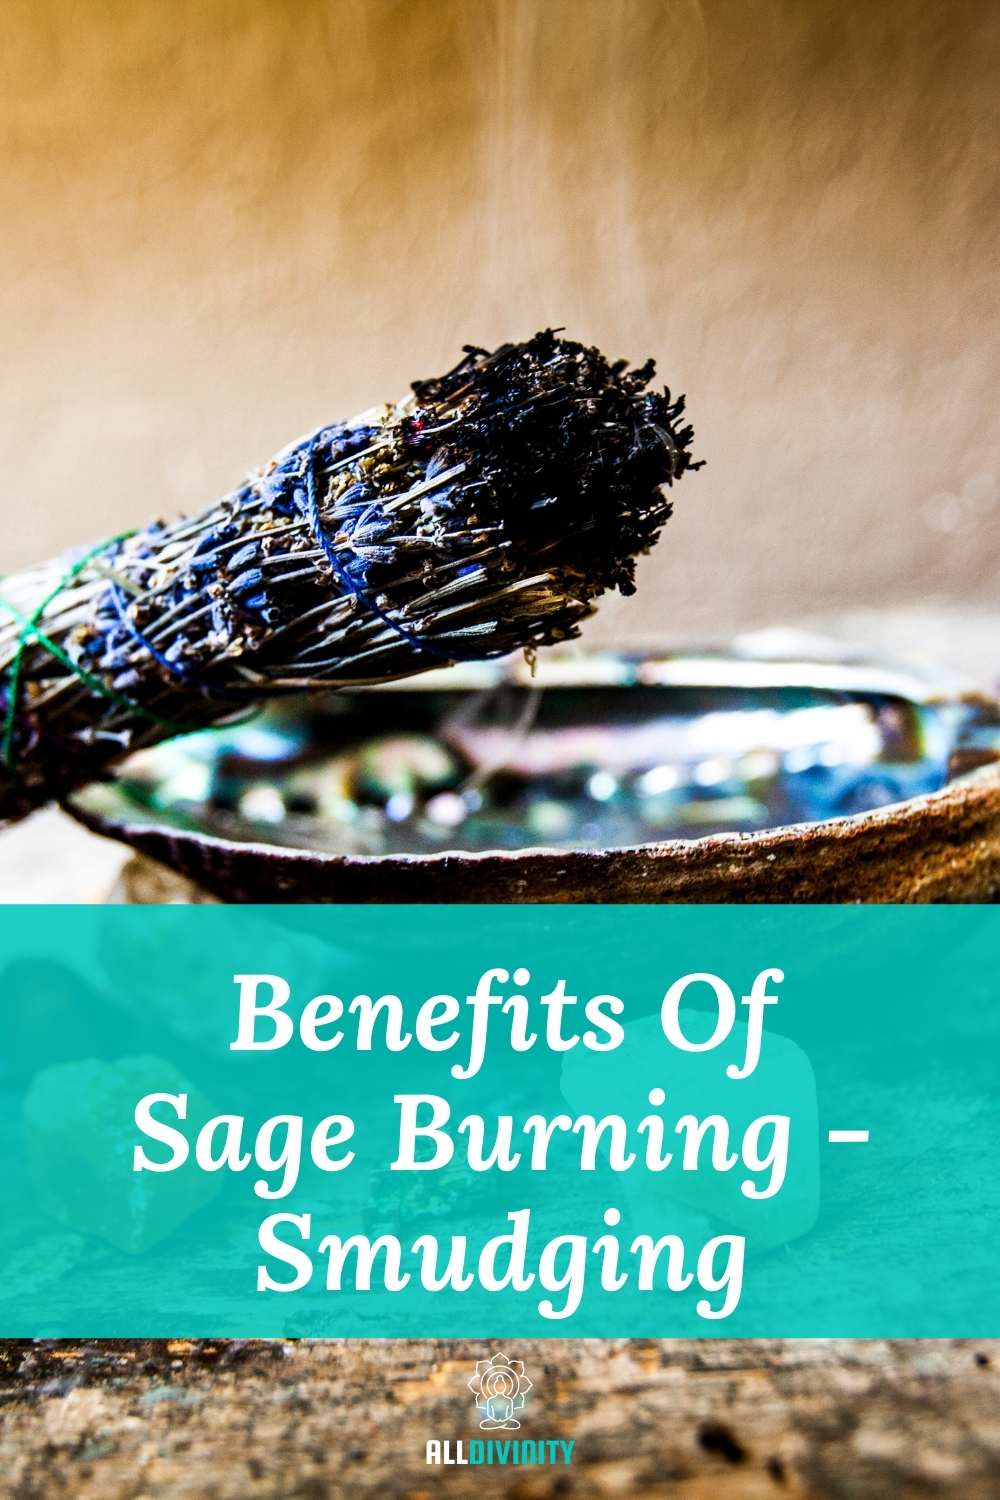 8 Benefits Of Burning Sage/Smudging - All Divinity - Your Spiritual Guide